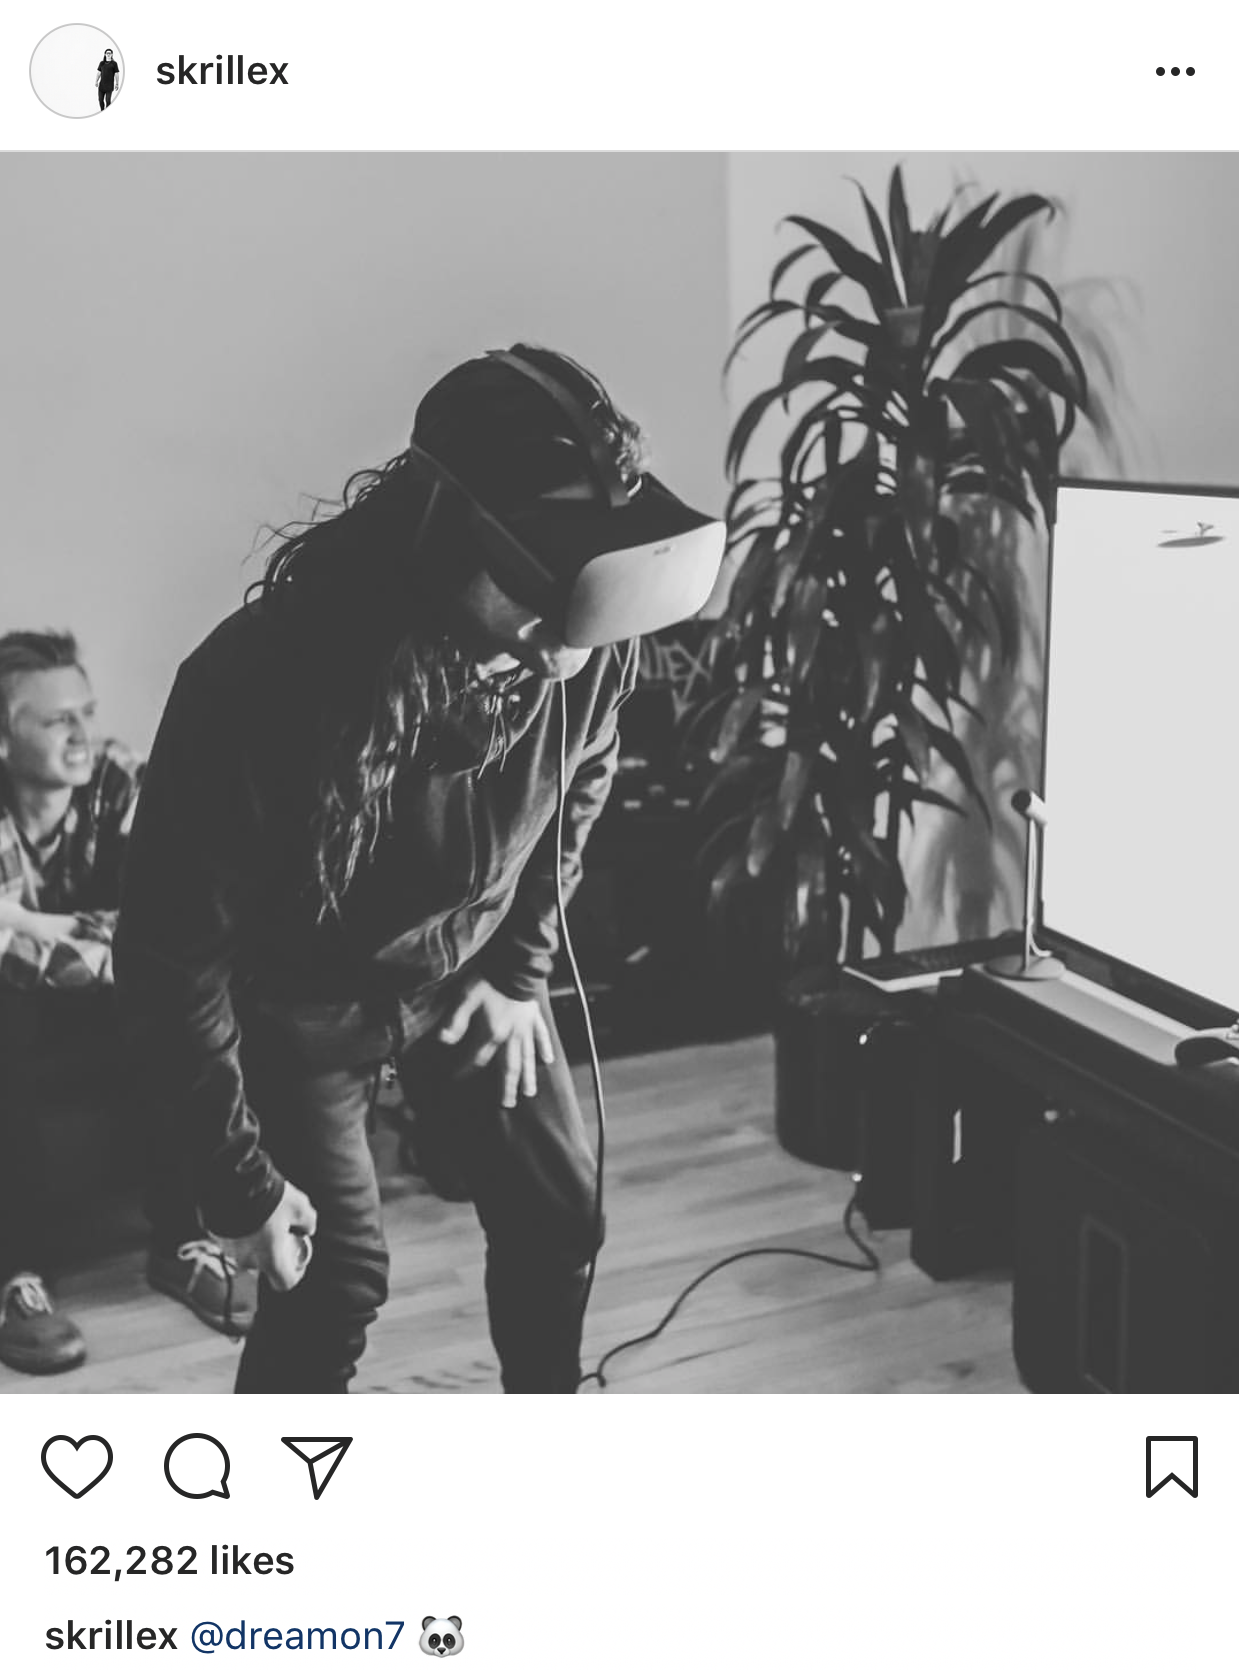 Skrillex in one of his first VR experiences with Oculus.